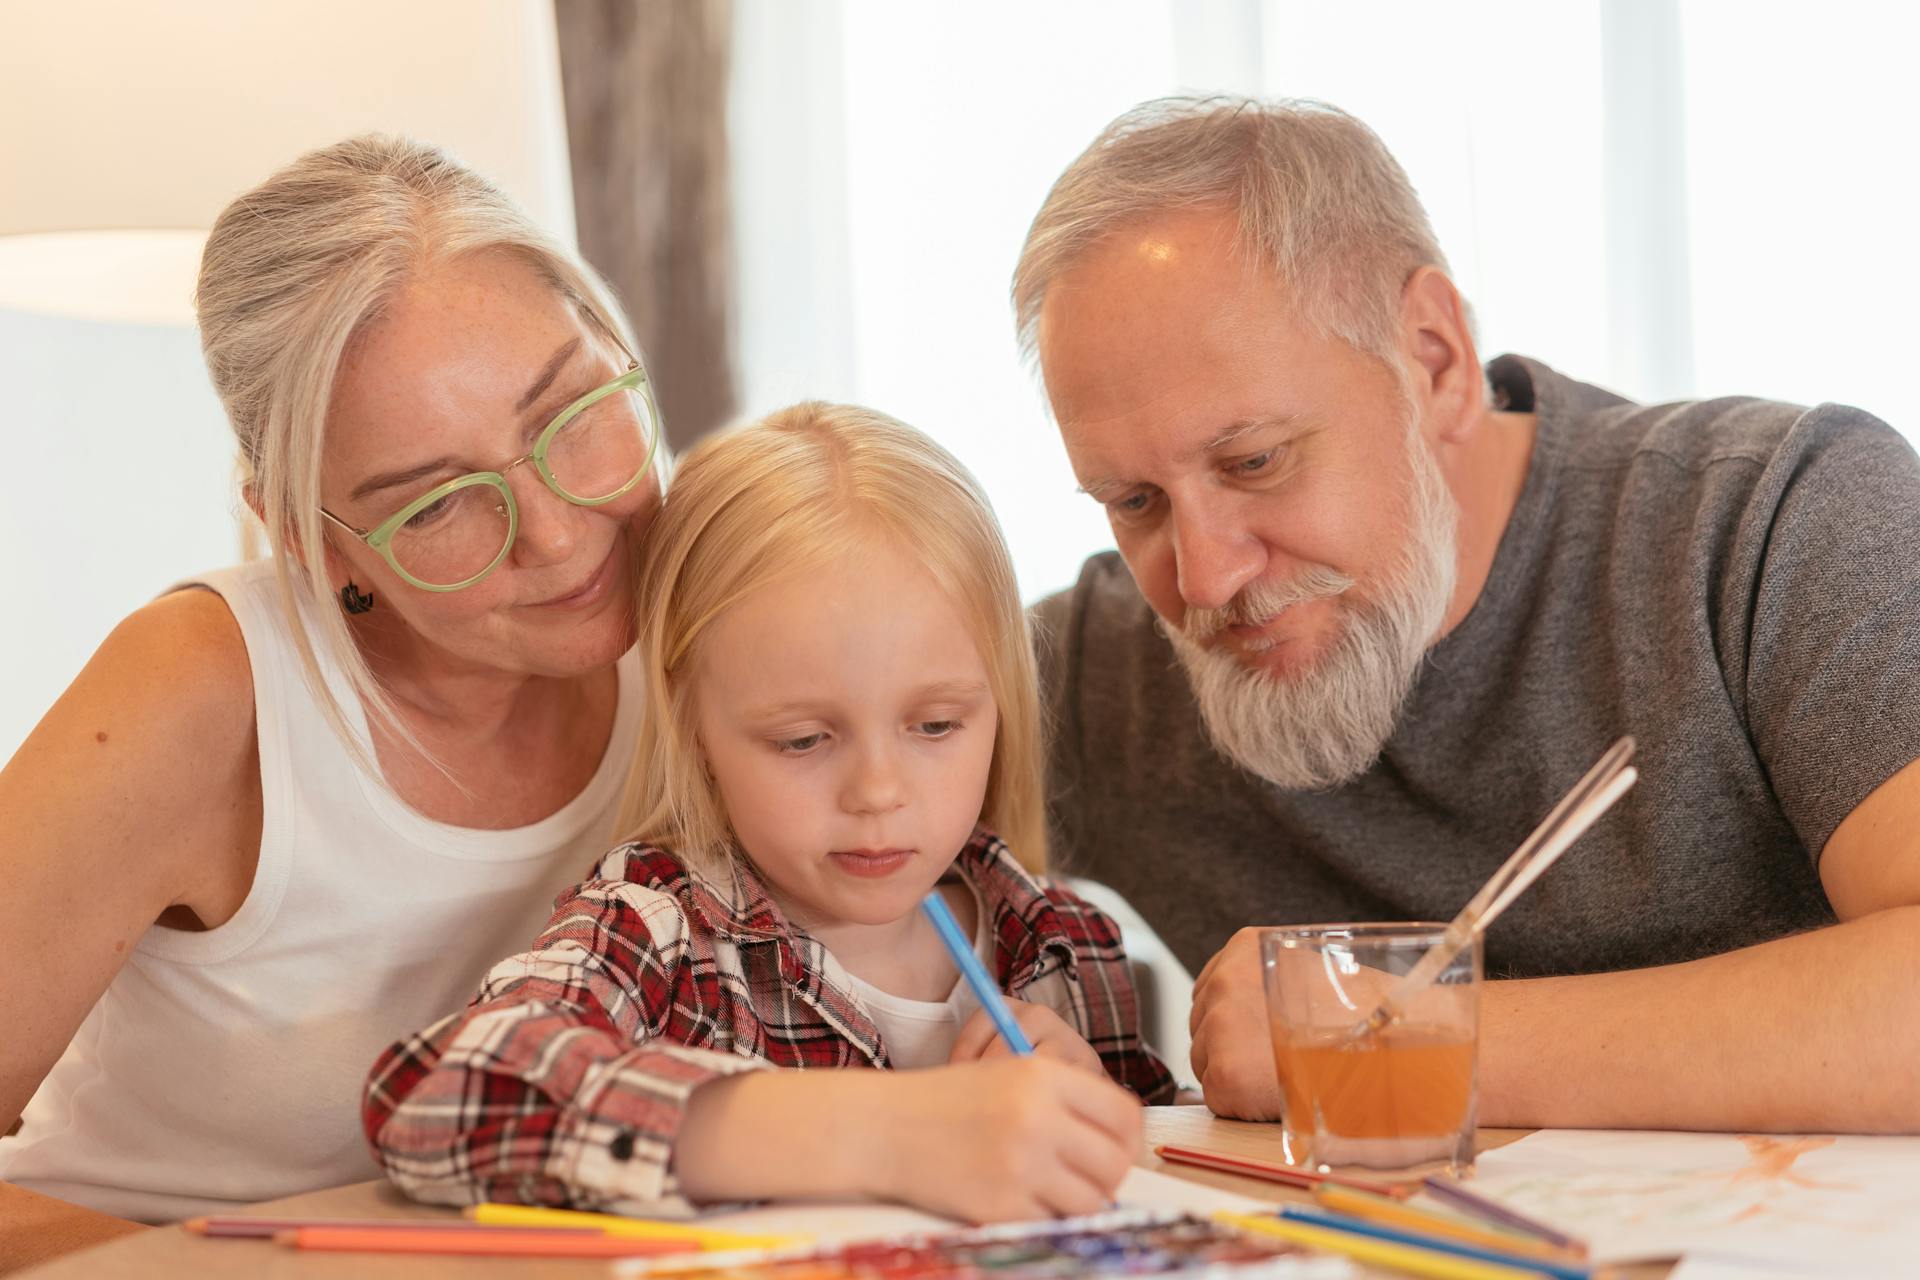 A little girl coloring with her grandparents | Source: Pexels